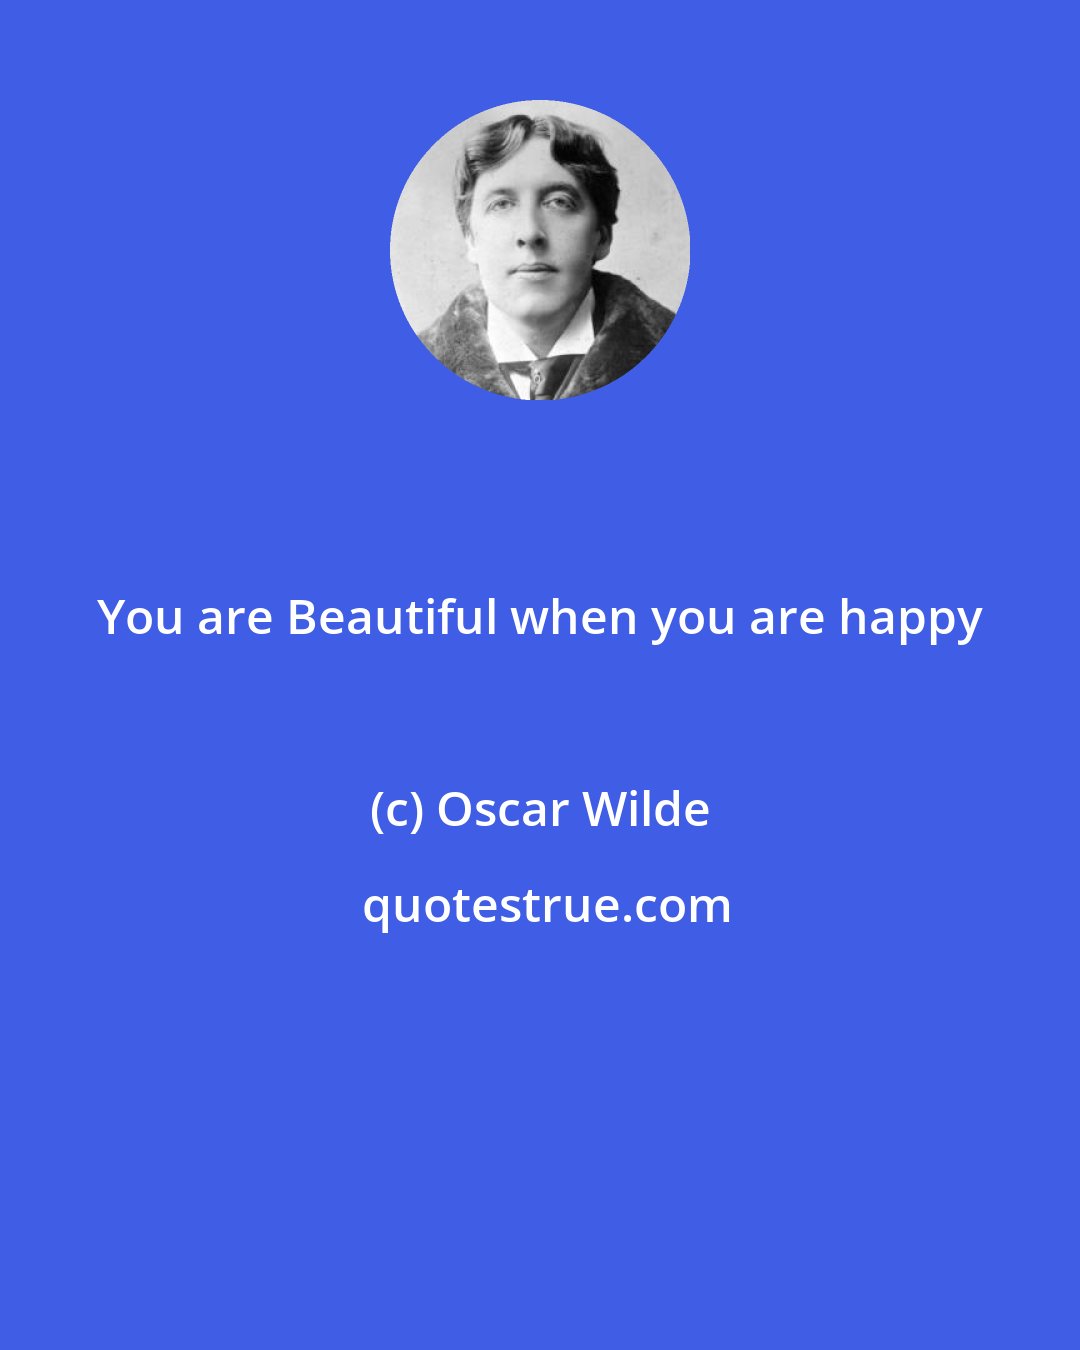 Oscar Wilde: You are Beautiful when you are happy